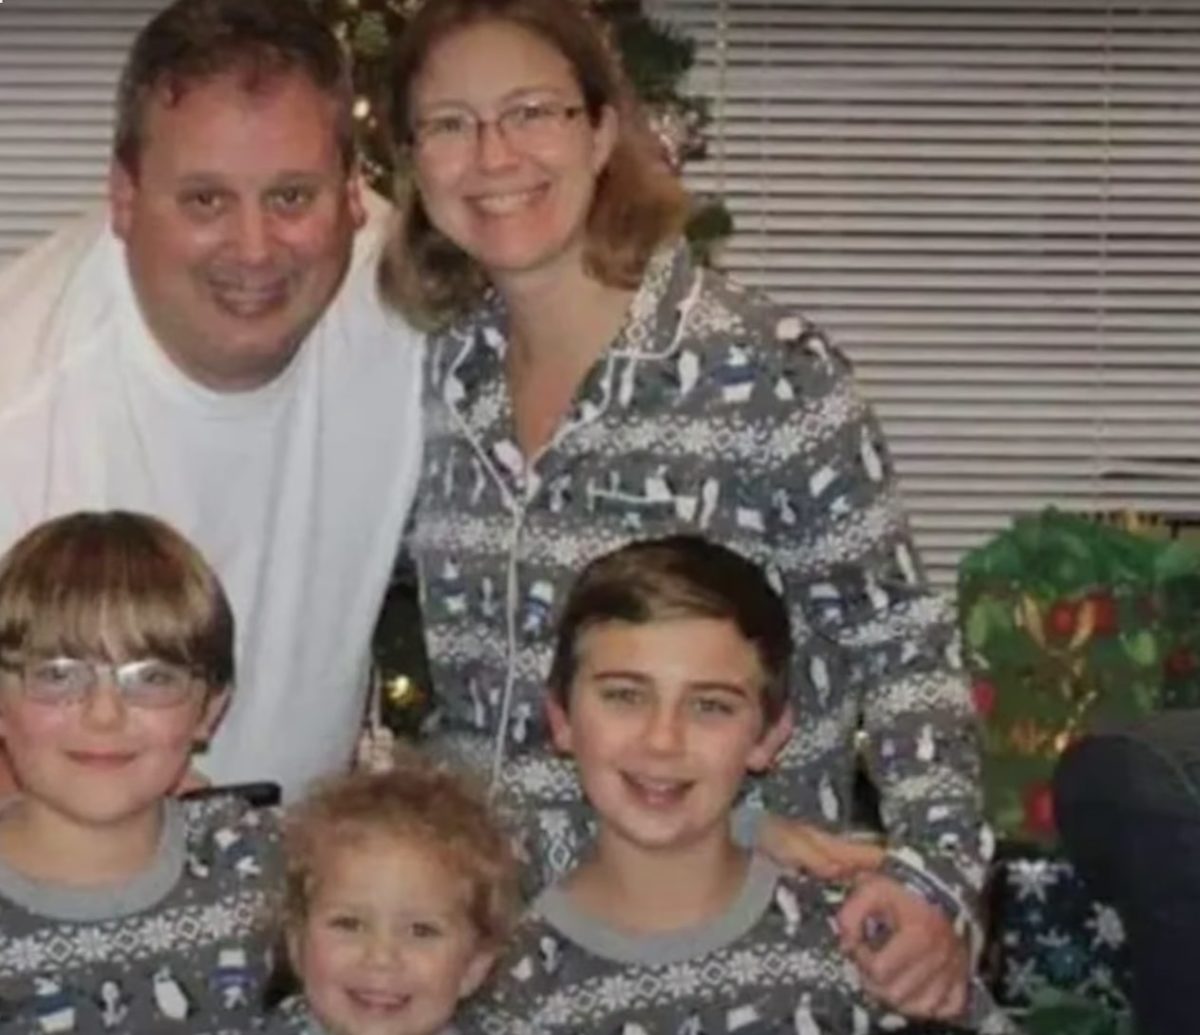 'disney dad' who lived with family's dead bodies saw murder